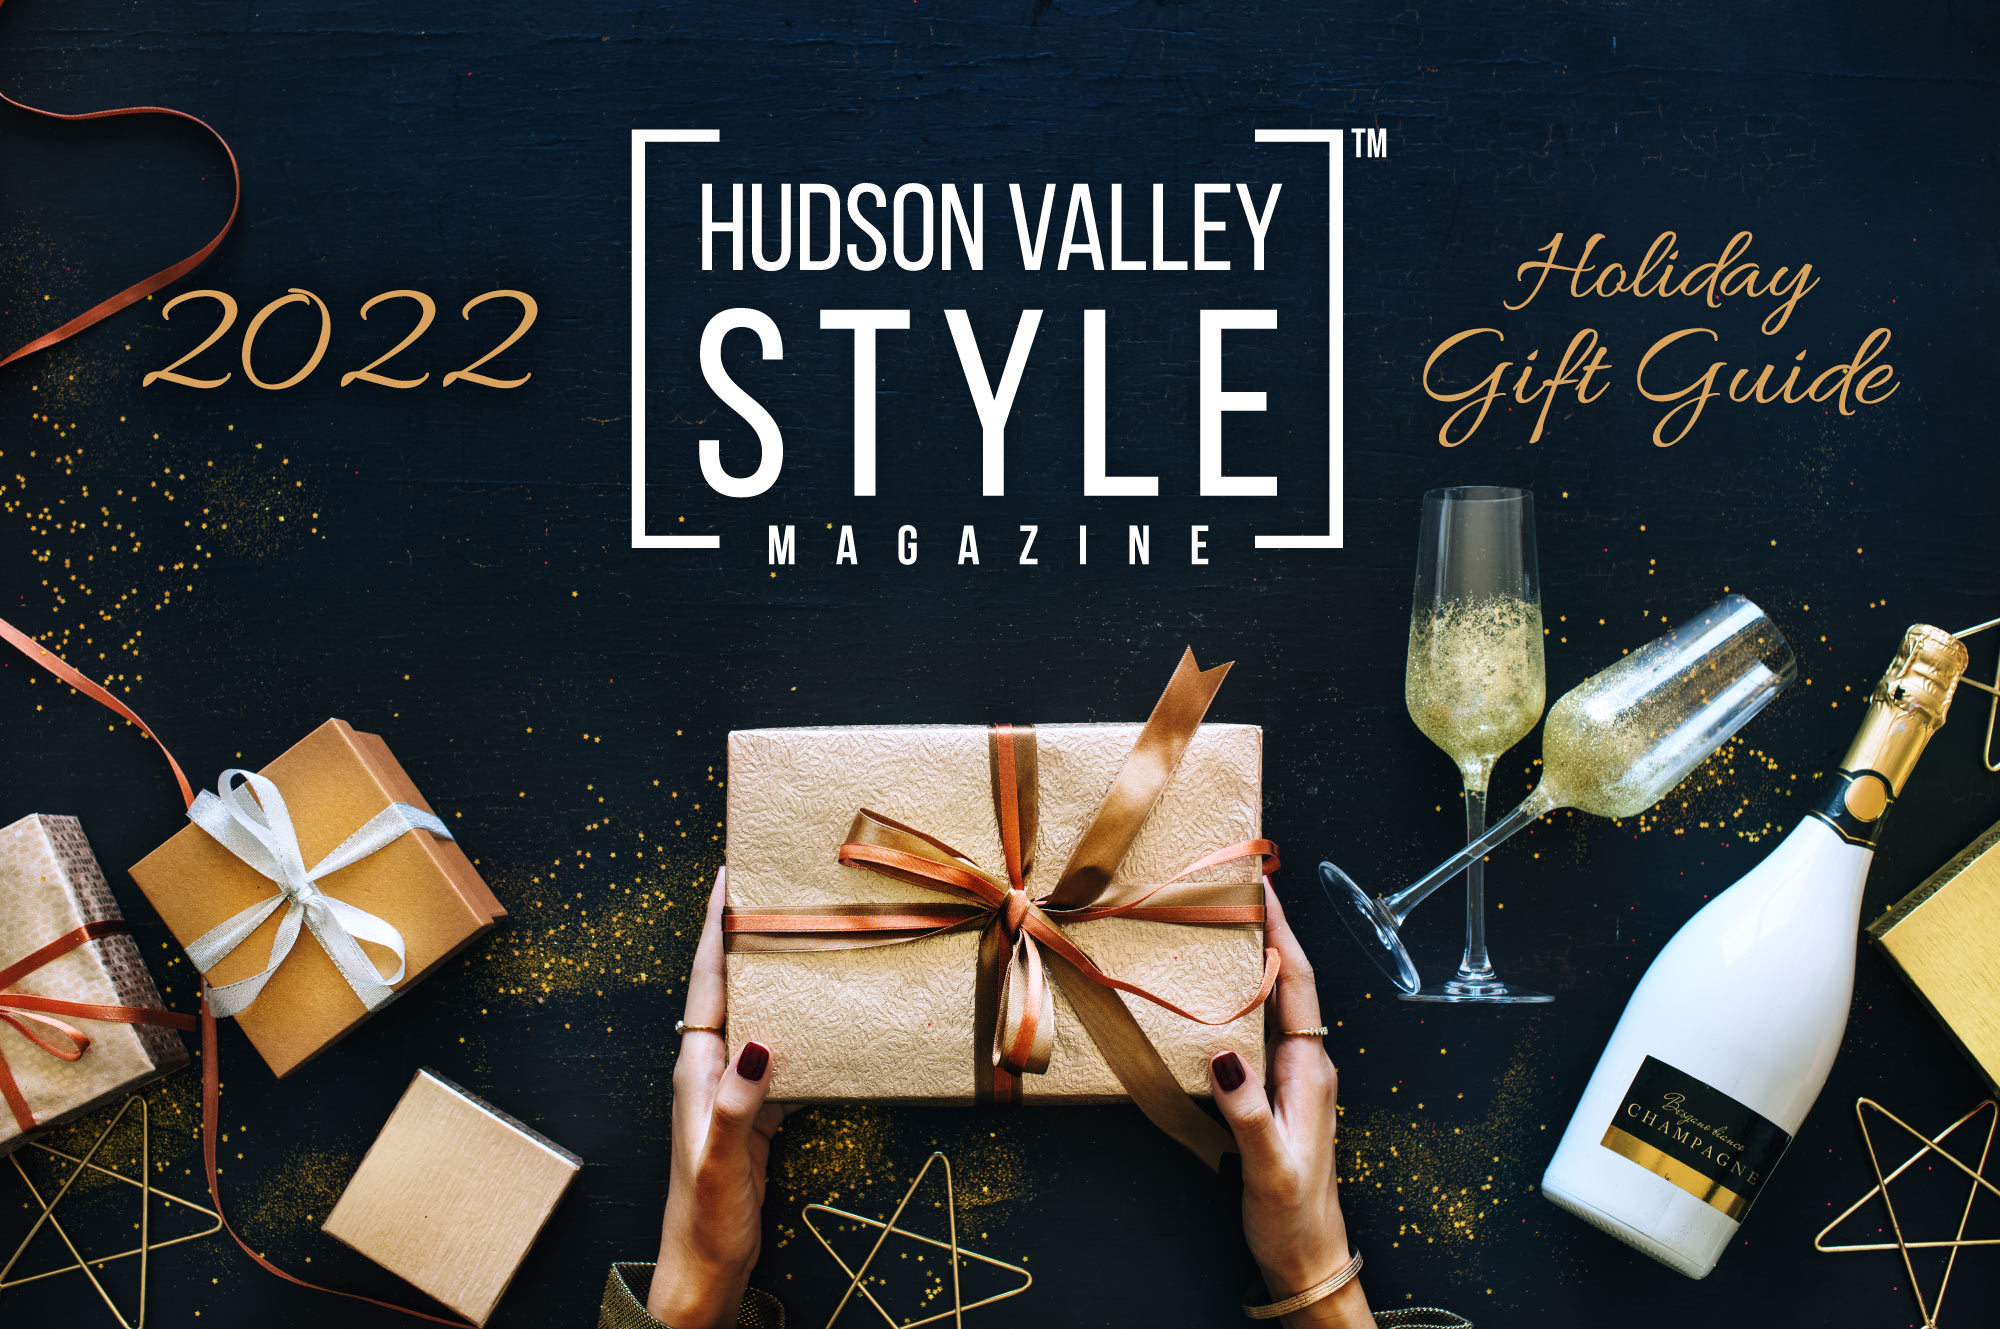 Top 3 Reasons to Promote Your Business in the Hudson Valley Style Magazine's 2022 Holiday Gift Guide